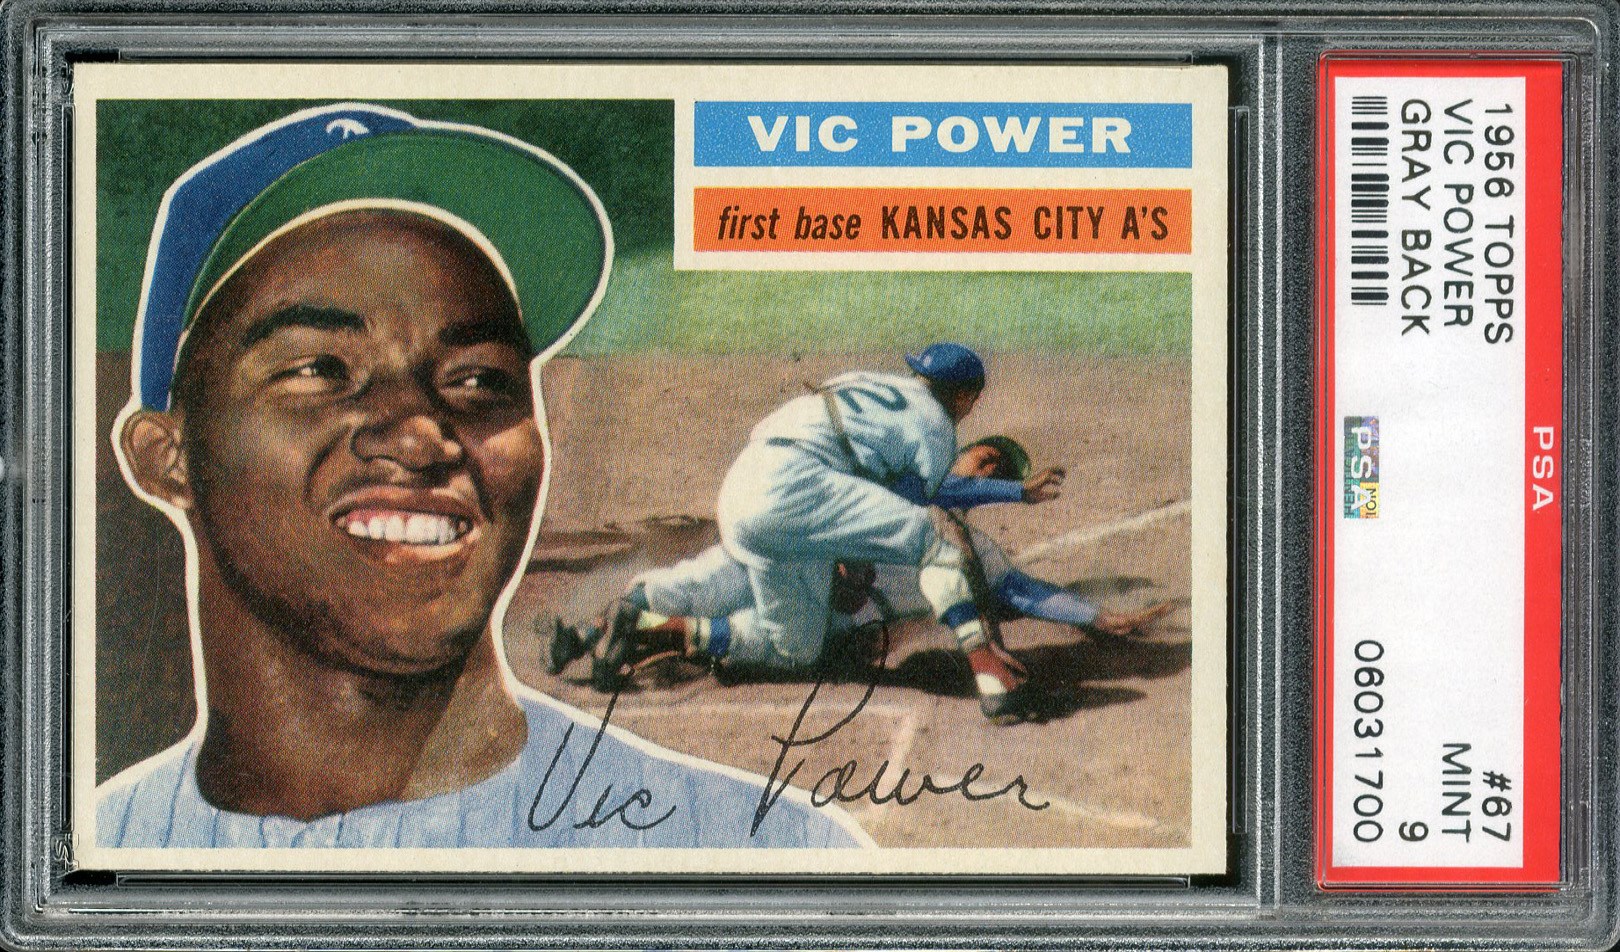 Baseball and Trading Cards - 1956 Topps #67 Vic Power Gray Back PSA MINT 9